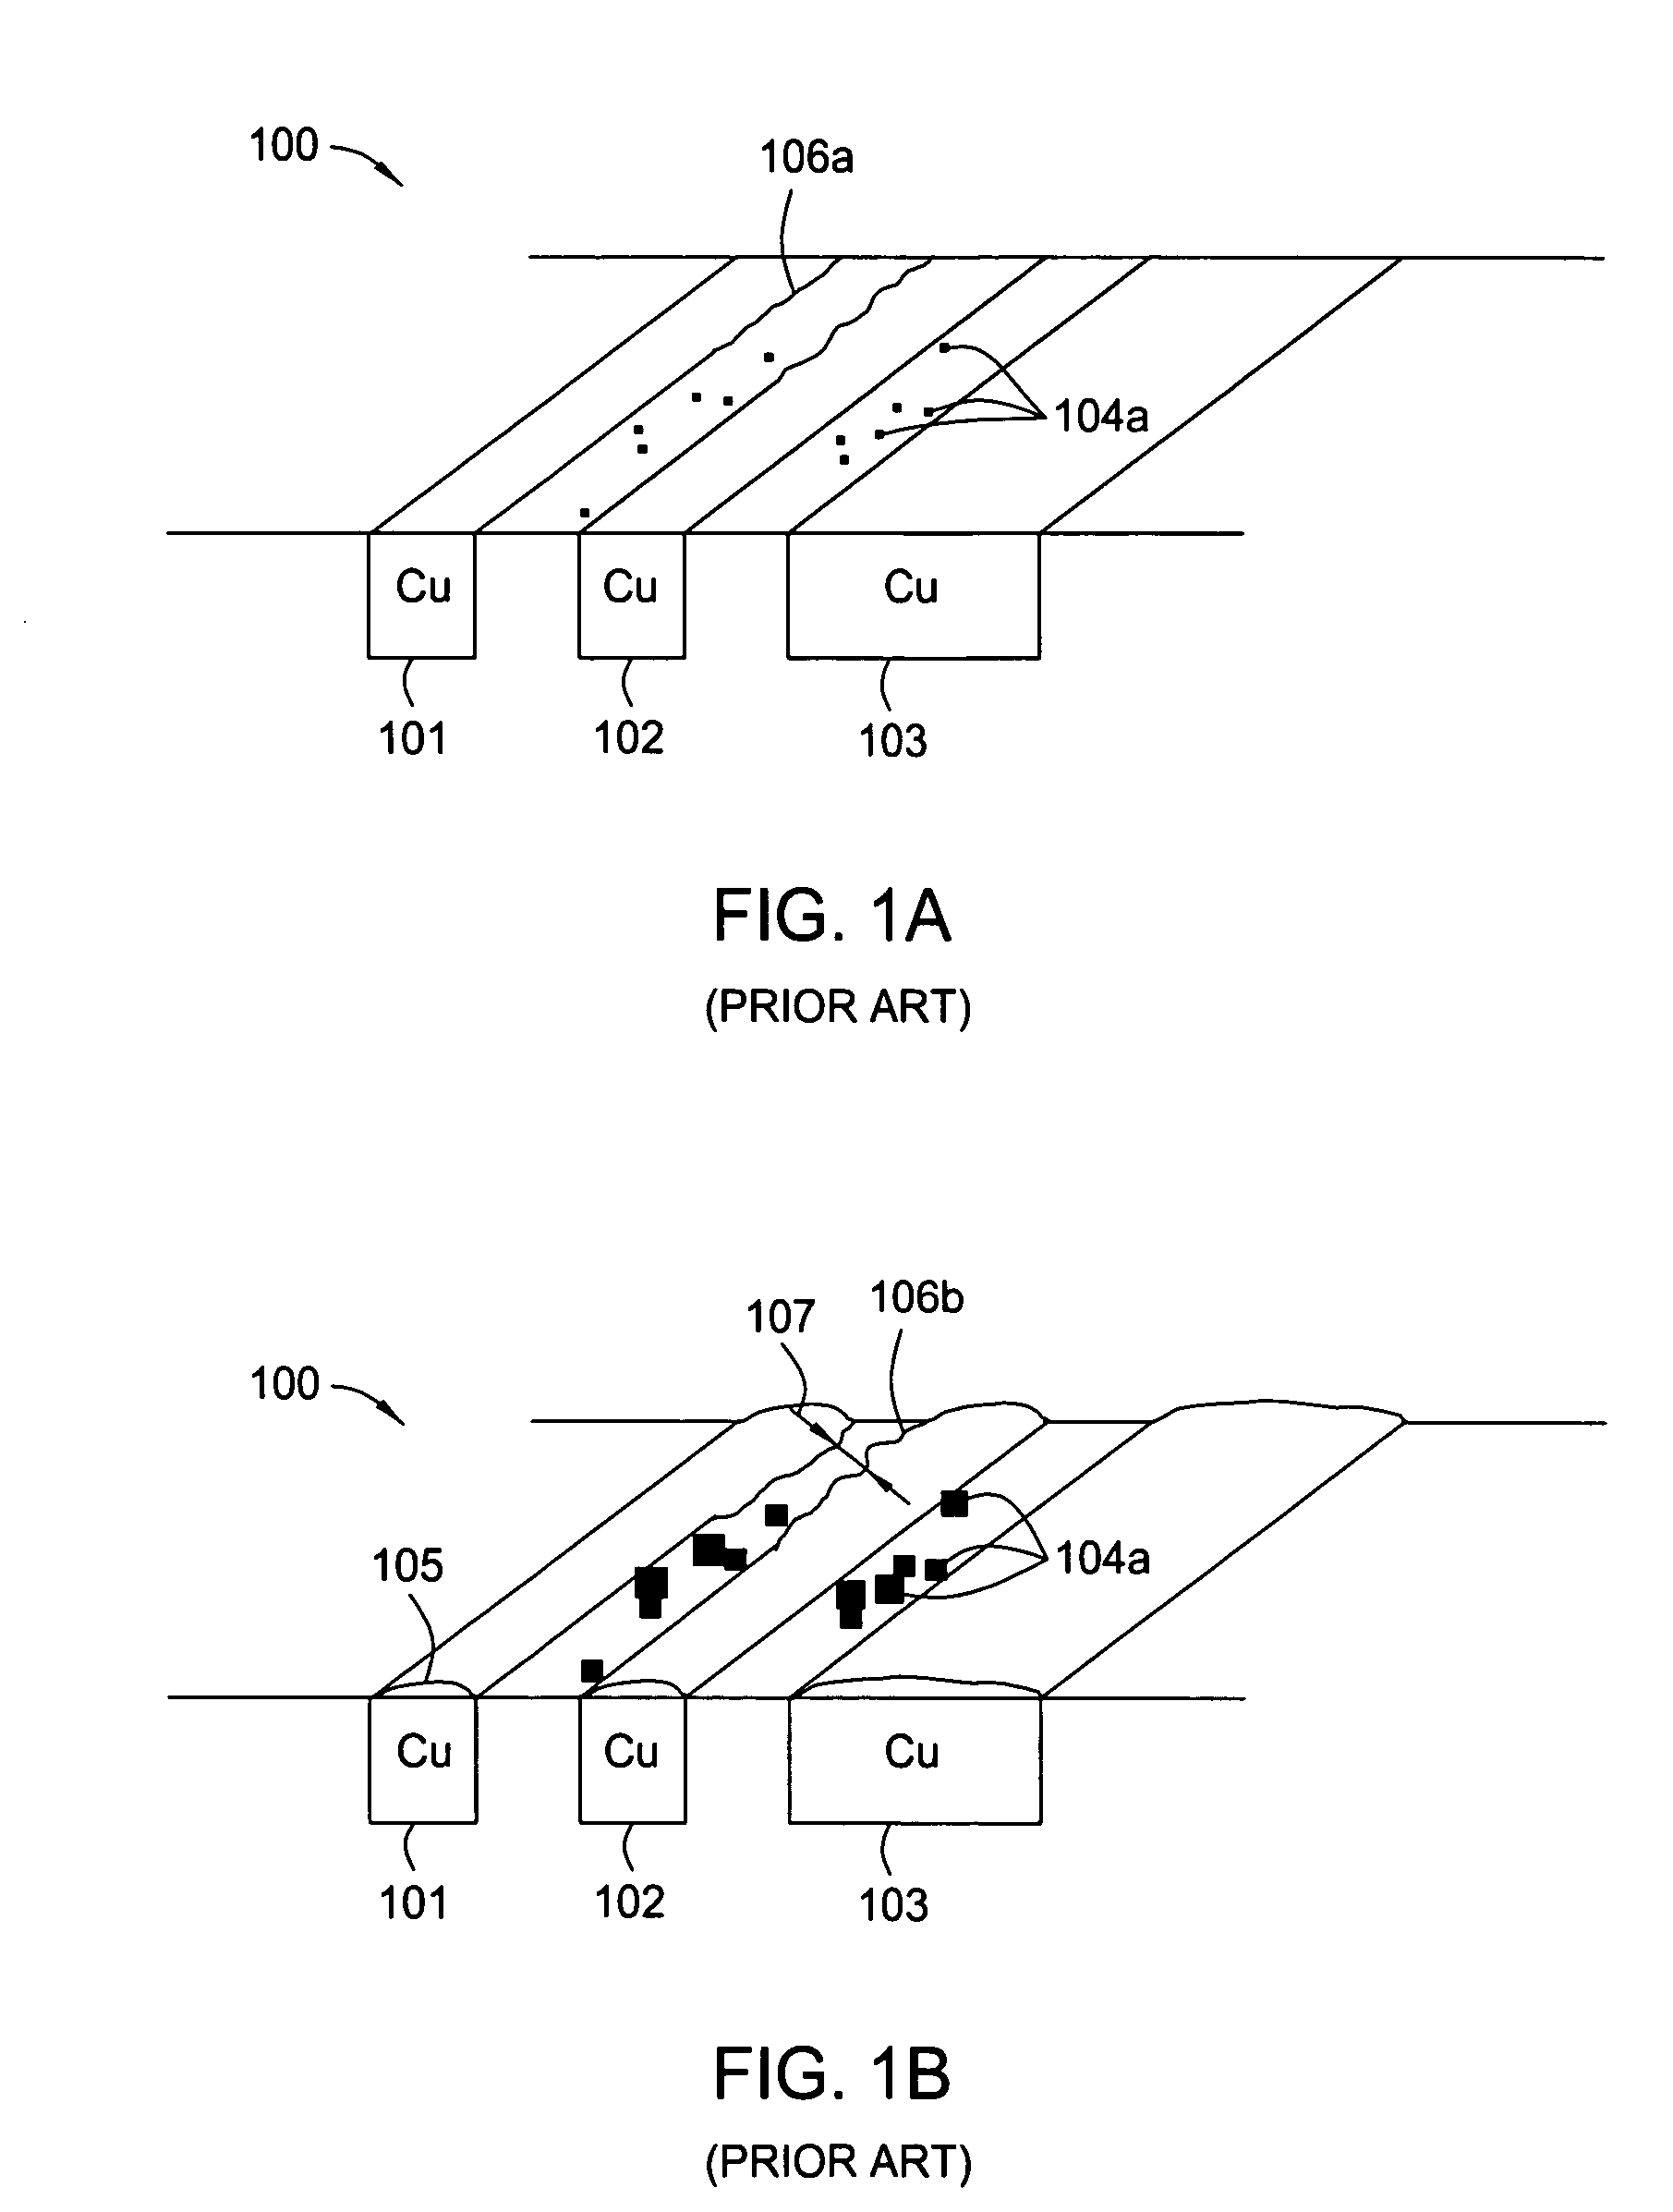 Integrated electroless deposition system